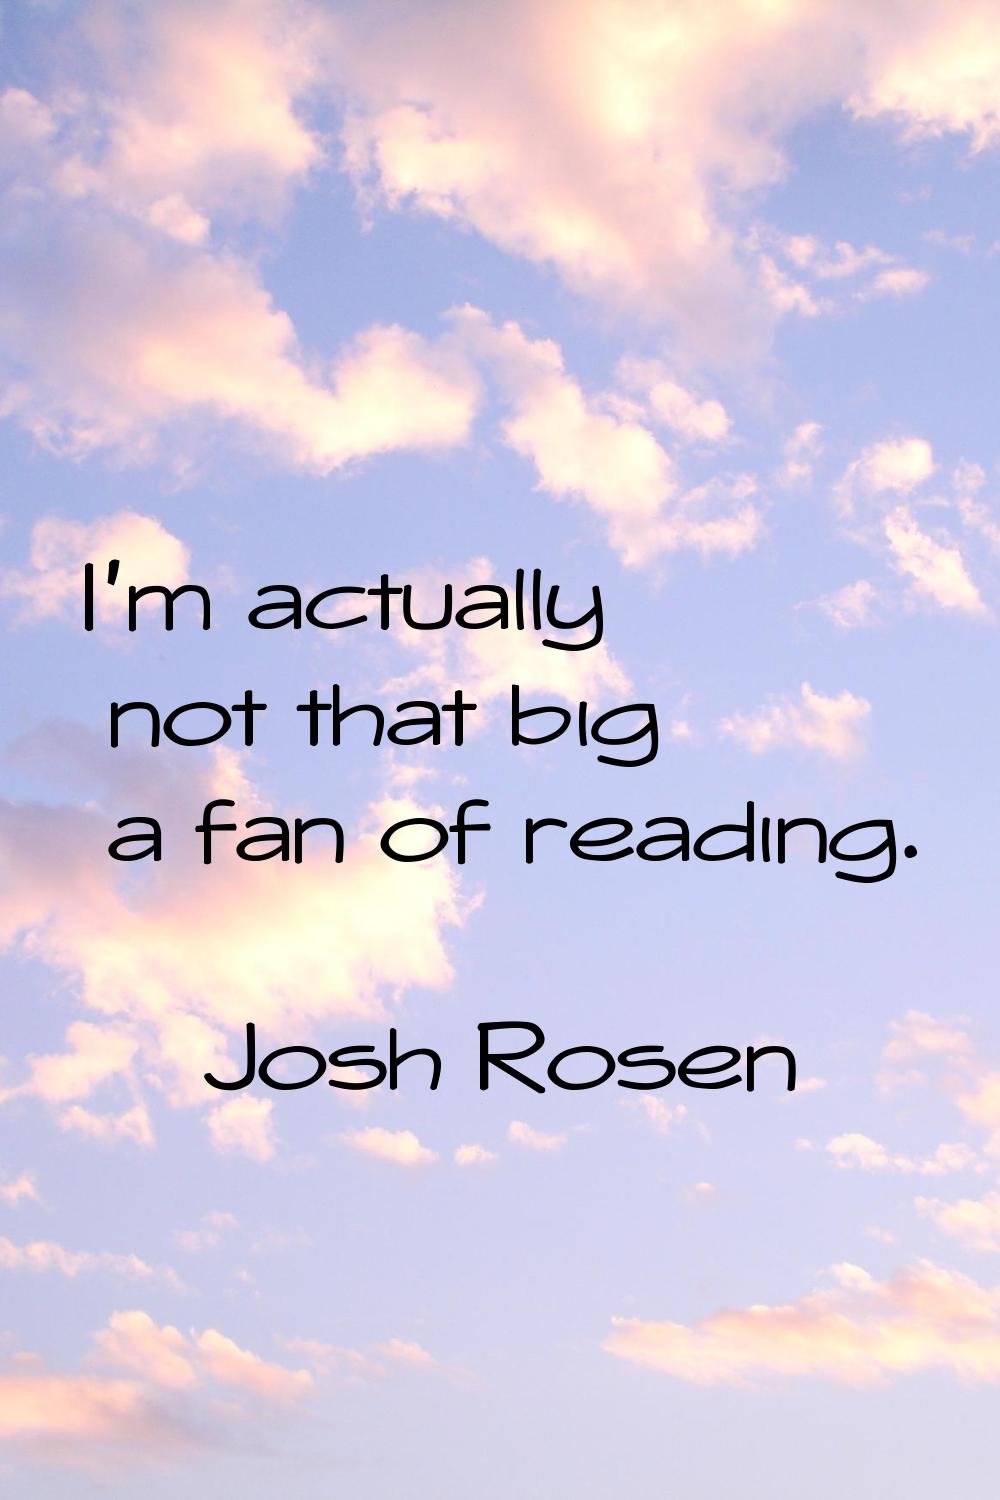 I'm actually not that big a fan of reading.